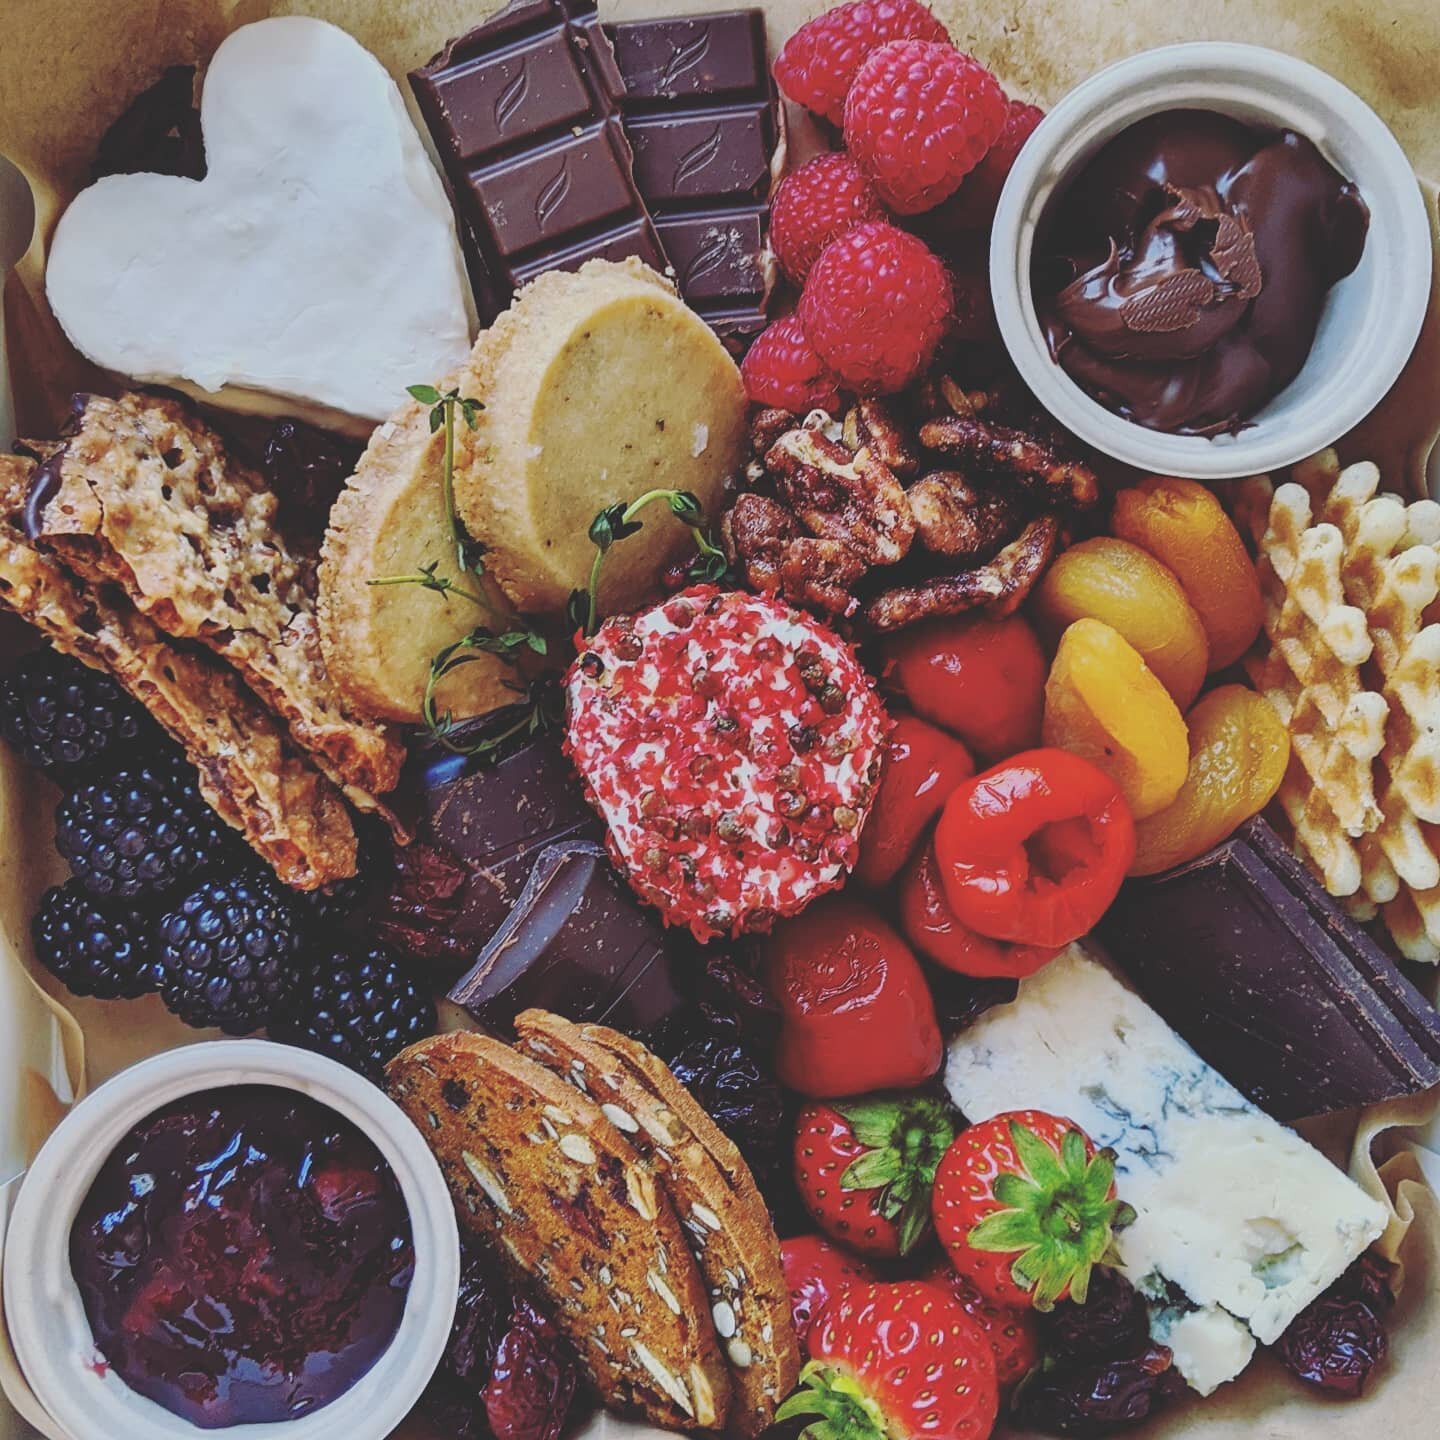 🧀 IS MY ❤️ LANGUAGE

Take a peek at this sweet treat, The Cheese + Chocolate Valentine's Day Box! What's inside:

CHEESES:
&bull; French Brie
&bull; Pink Peppercorn Chevre
&bull; Gorgonzola Dolce

CHOCOLATES:
&bull; 39% Milk w/ Almonds
&bull; 60% Da